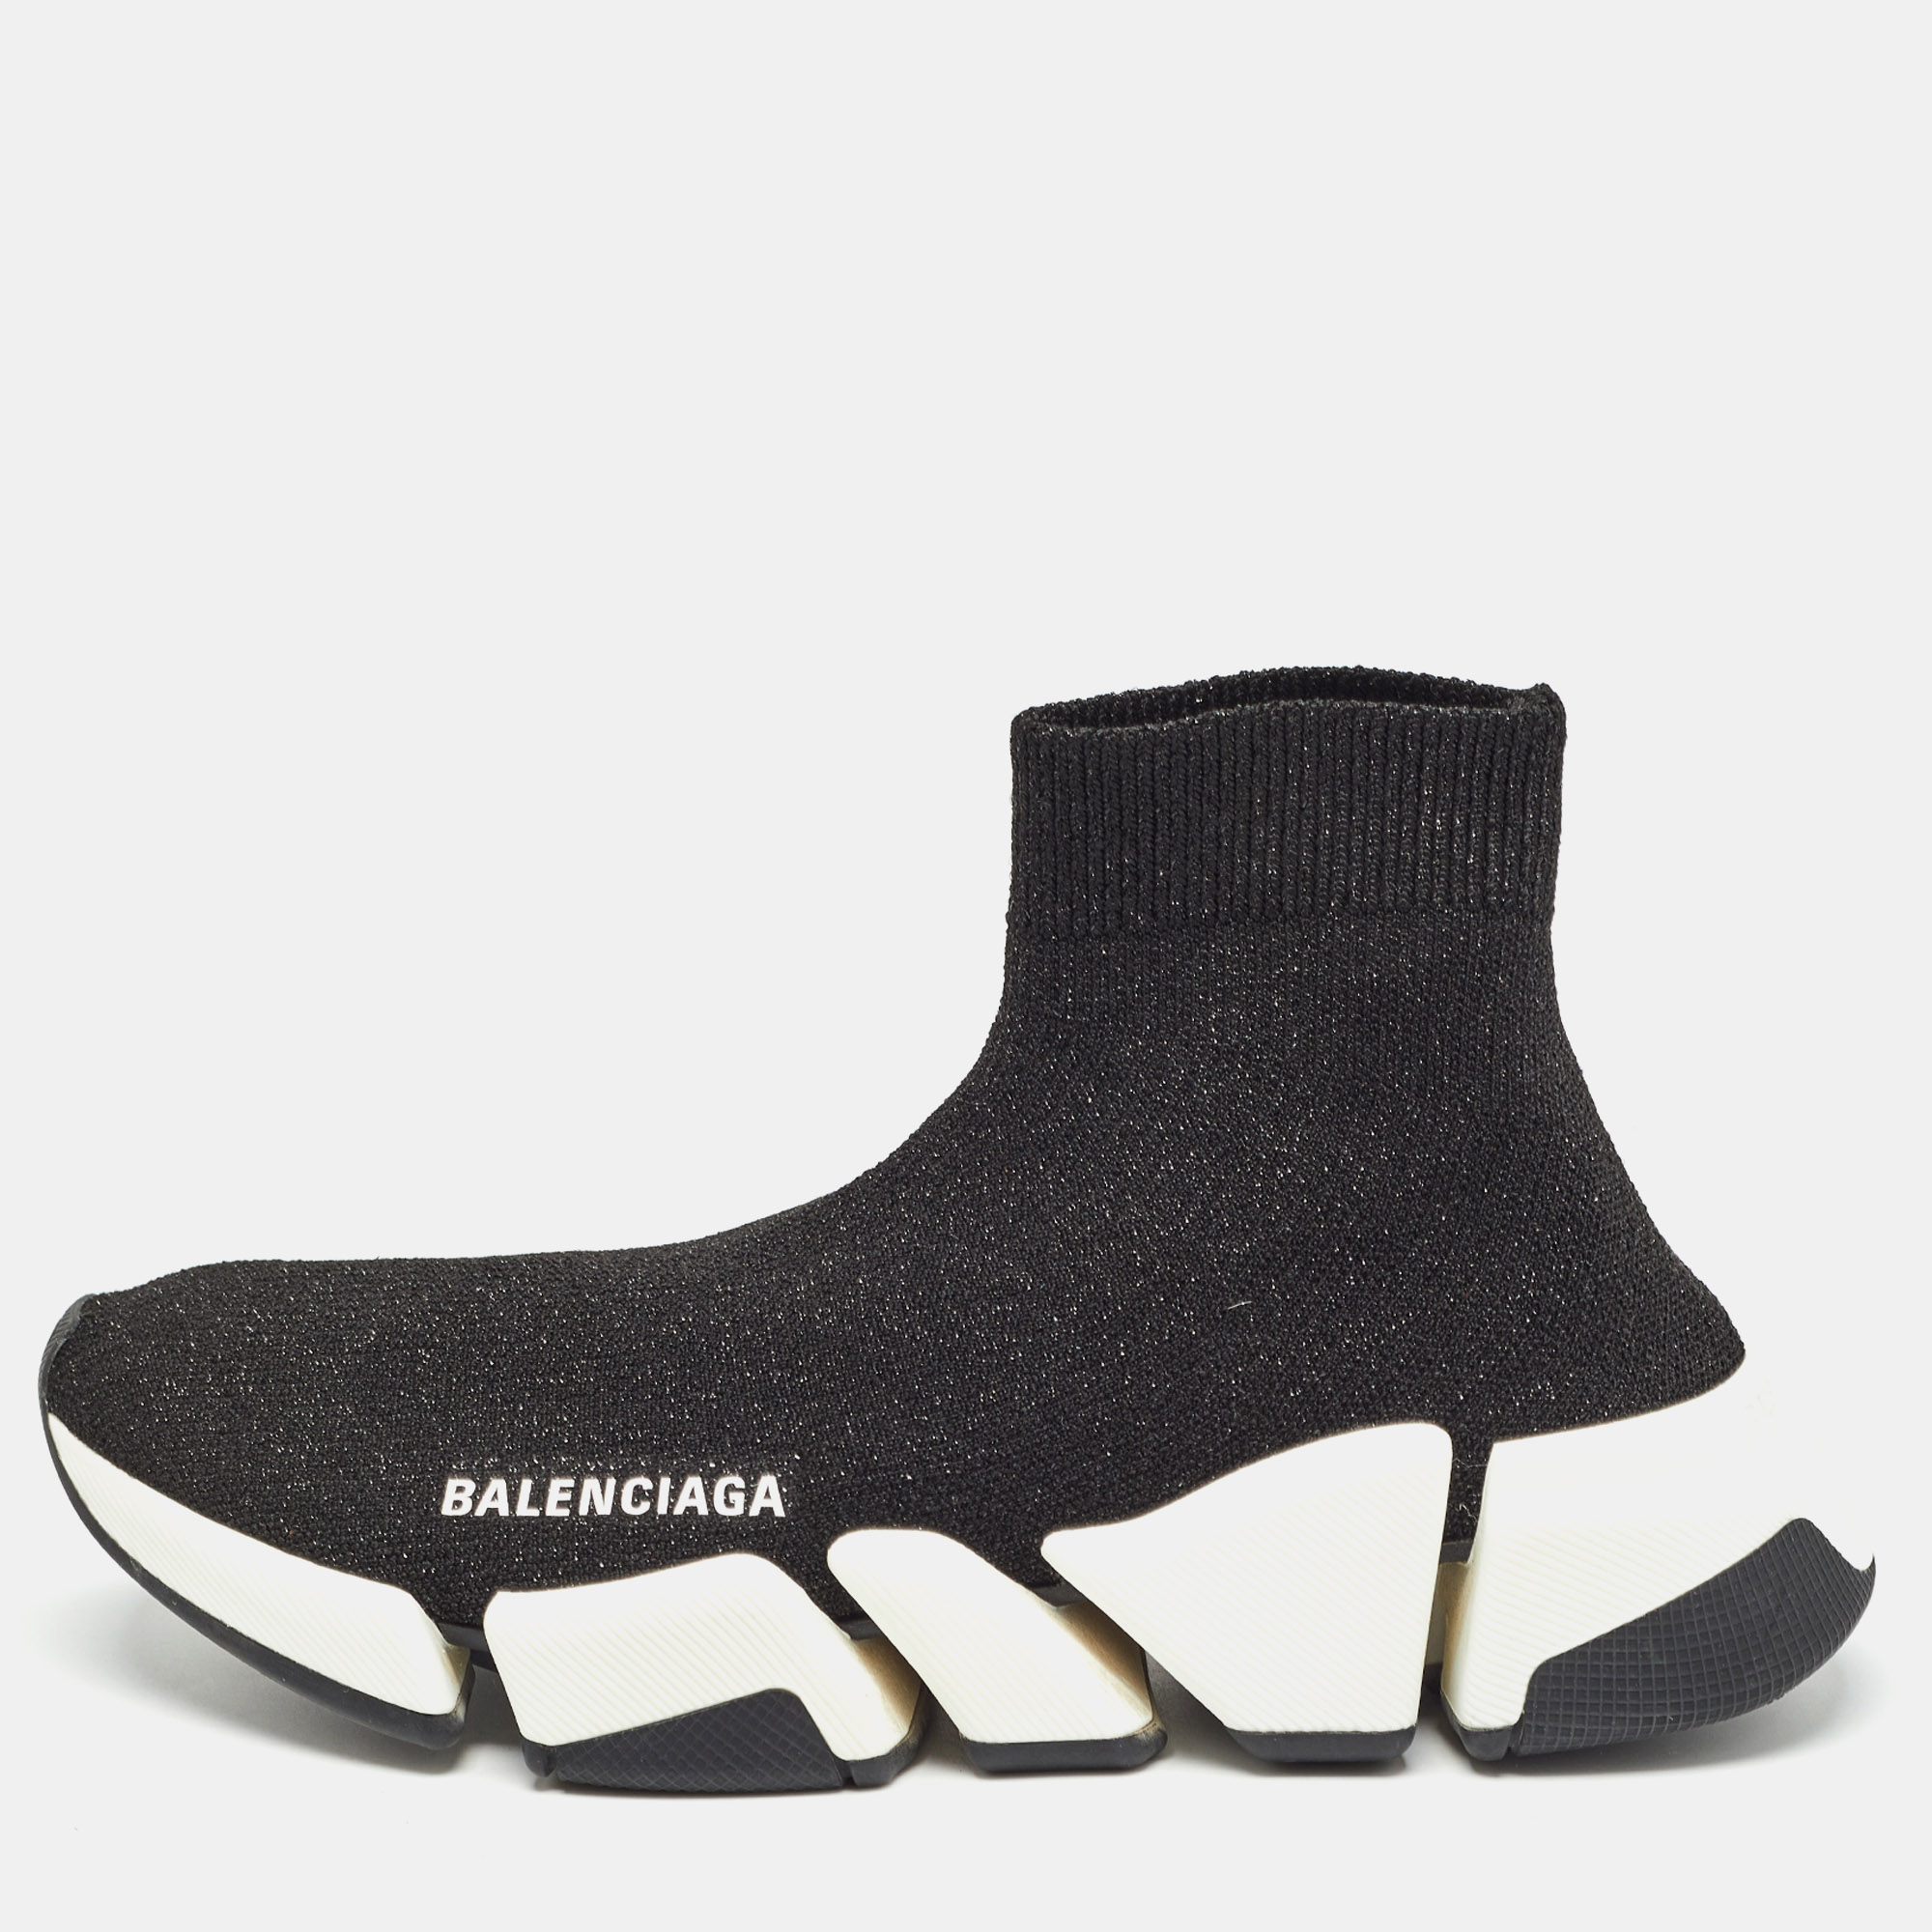 Pre-owned Balenciaga Black Glitter Knit Fabric Speed Trainer Sneakers Size 37